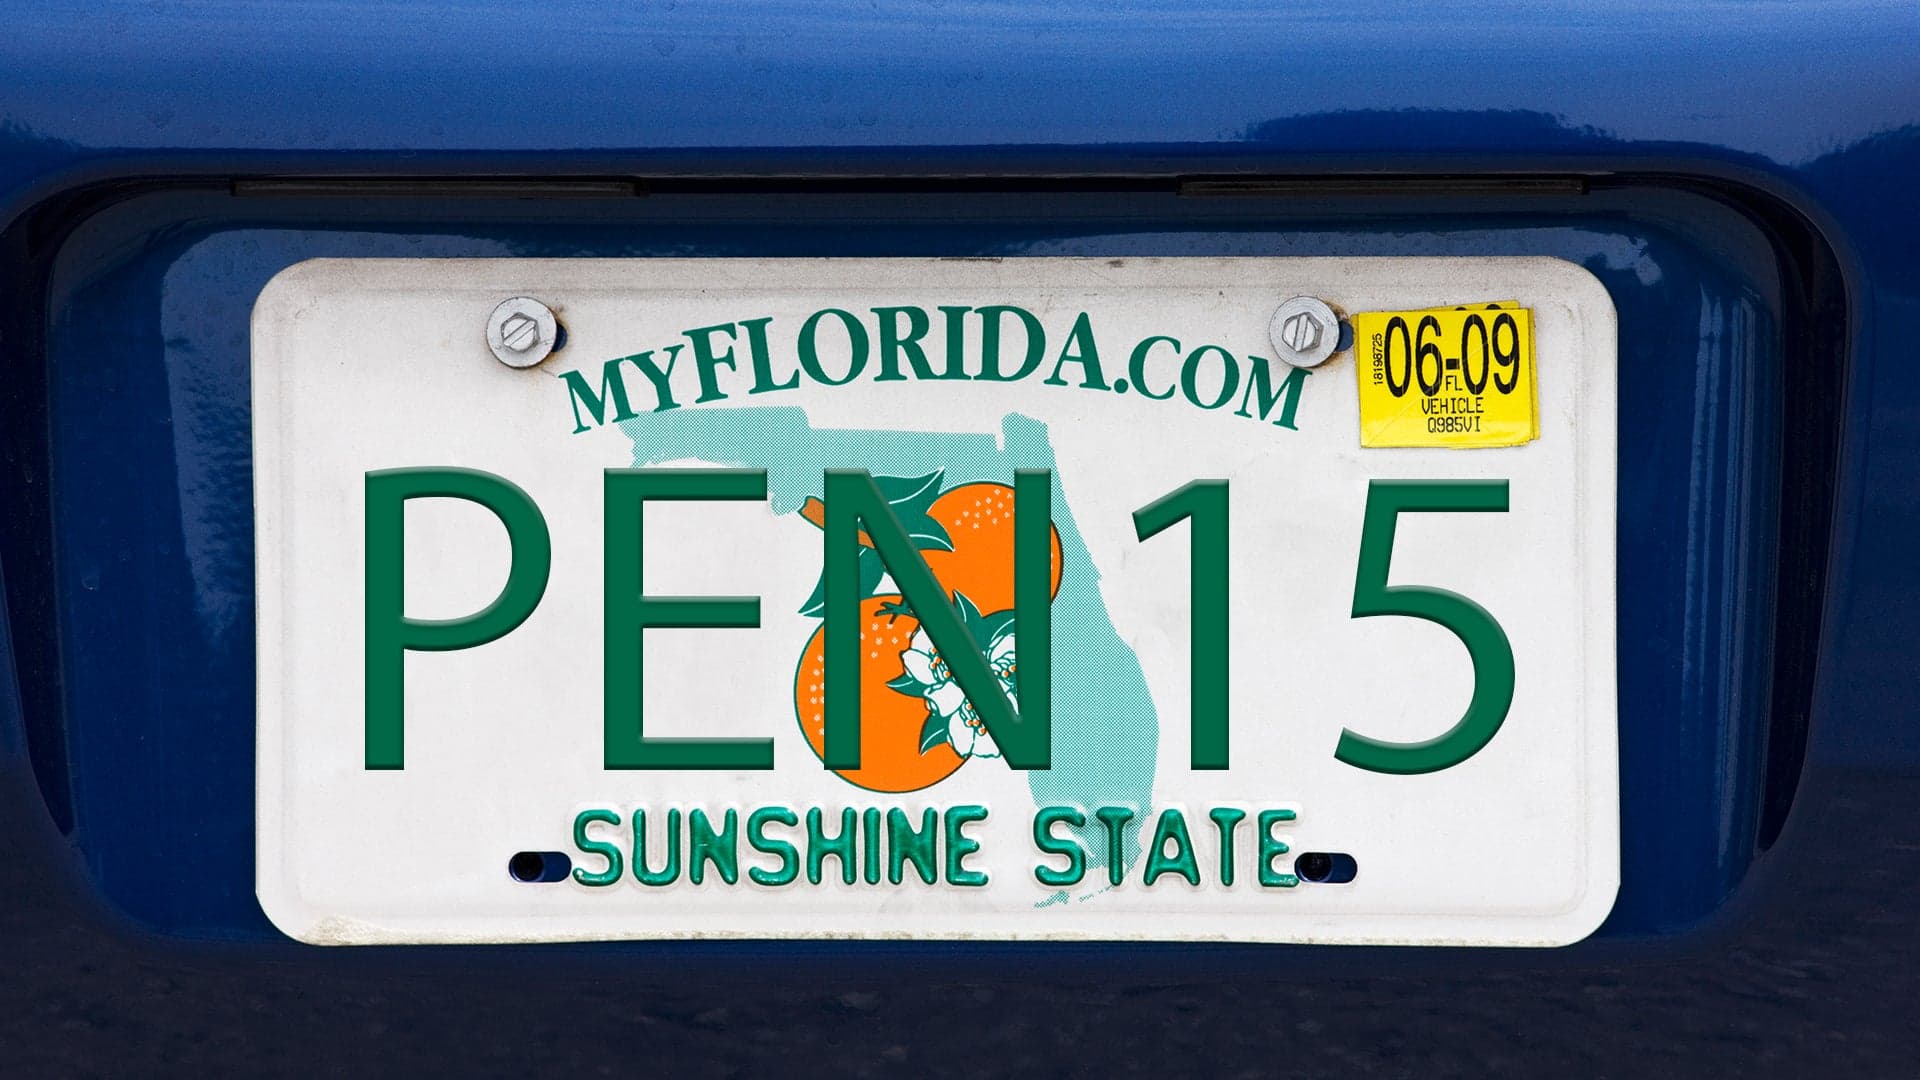 These Are the Custom License Plates the State of Florida Rejected in 2018